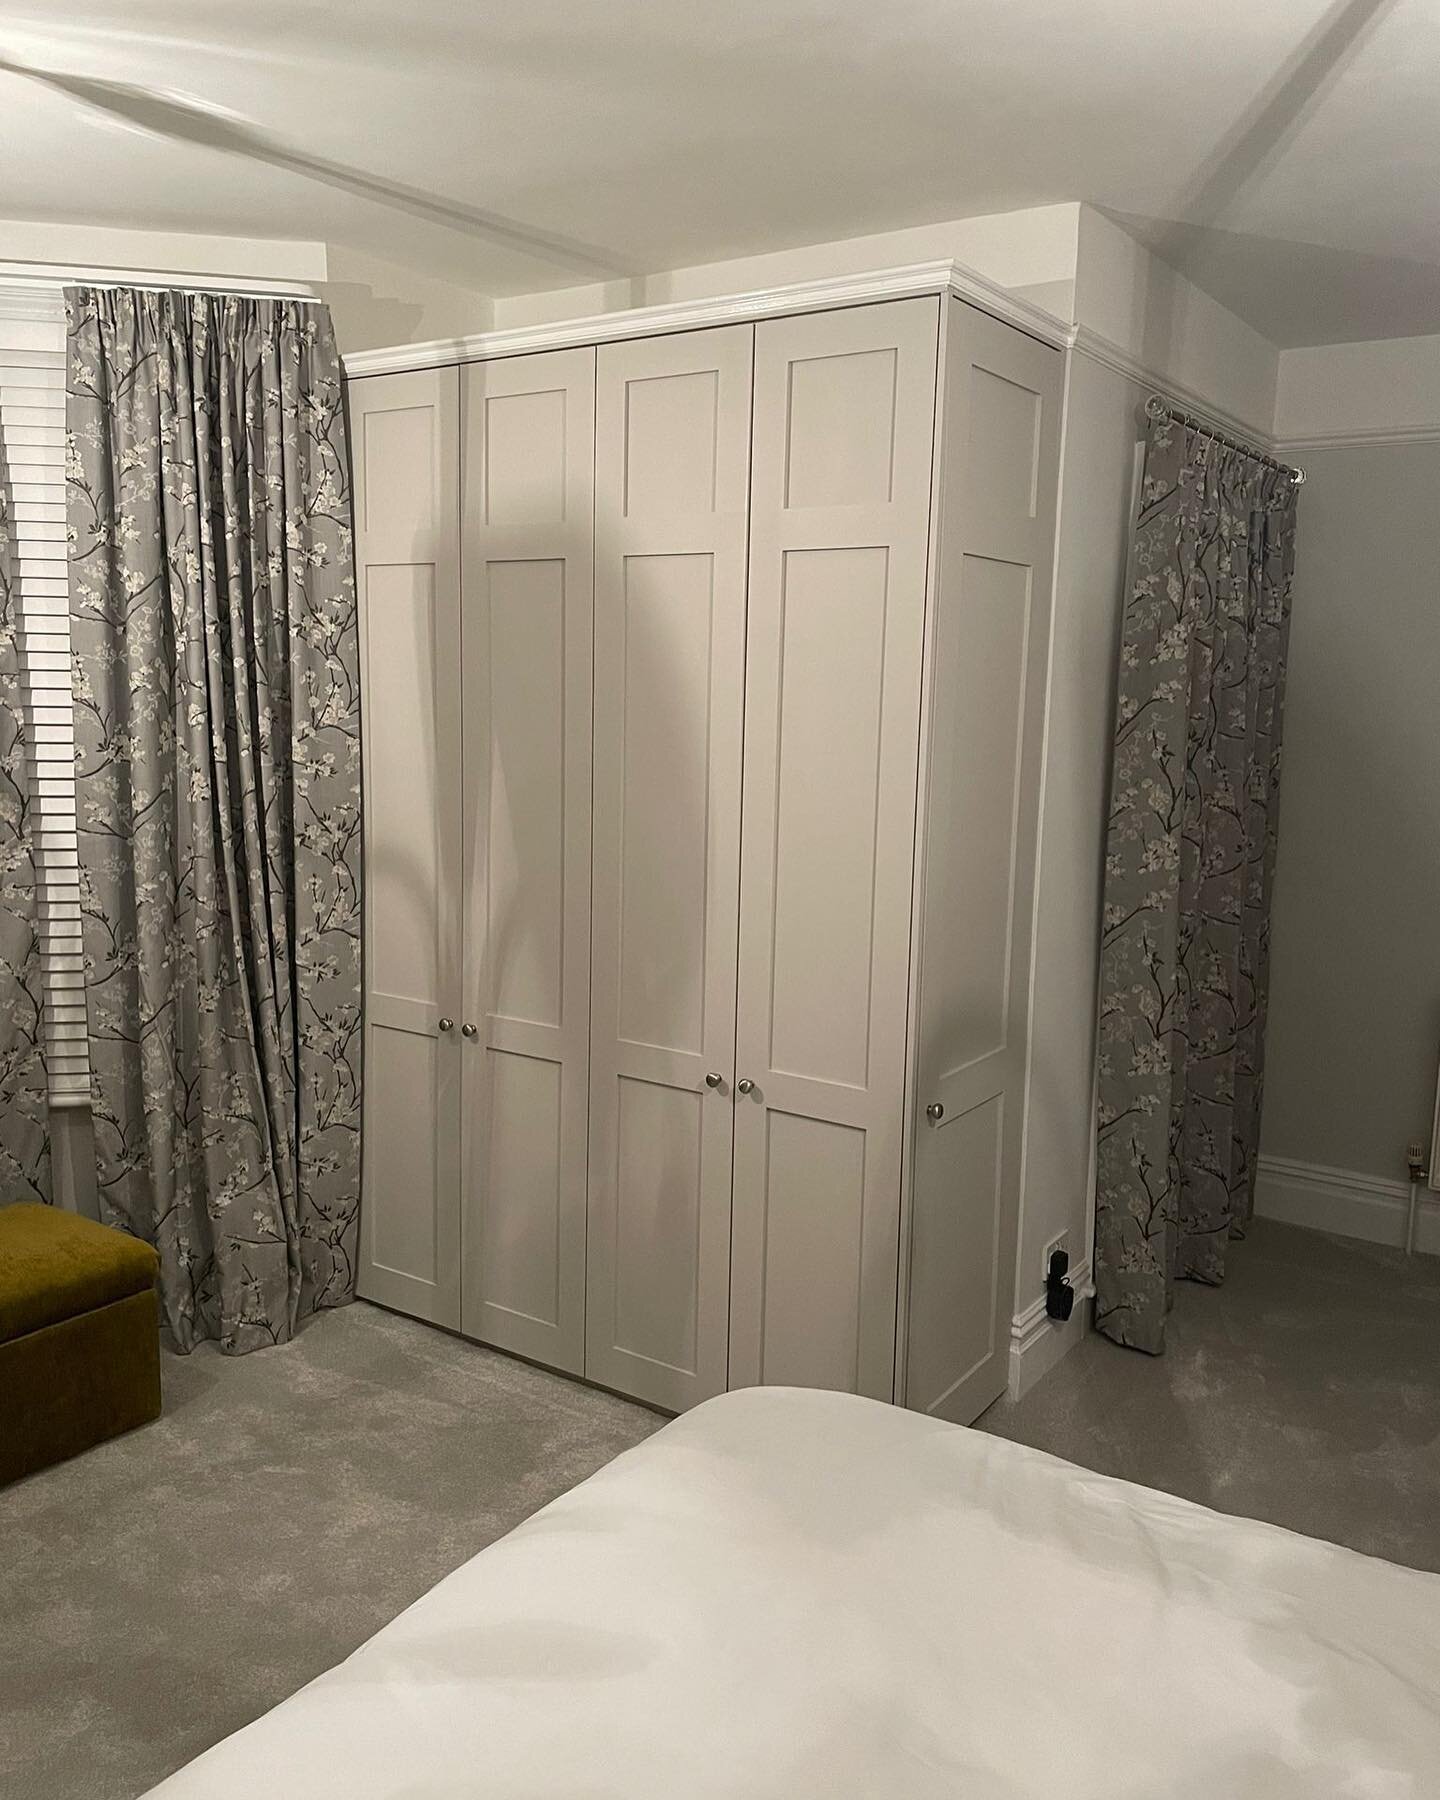 We recently constructed a pair of built-in wardrobes in East Grinstead ✔️
⠀
▫️ The customer wanted &ldquo;His &amp; Hers&rdquo; built-in wardrobes you fit specific spaces in their bedroom
⠀
◾️The wardrobes are made from moisture resistant MDF and fin